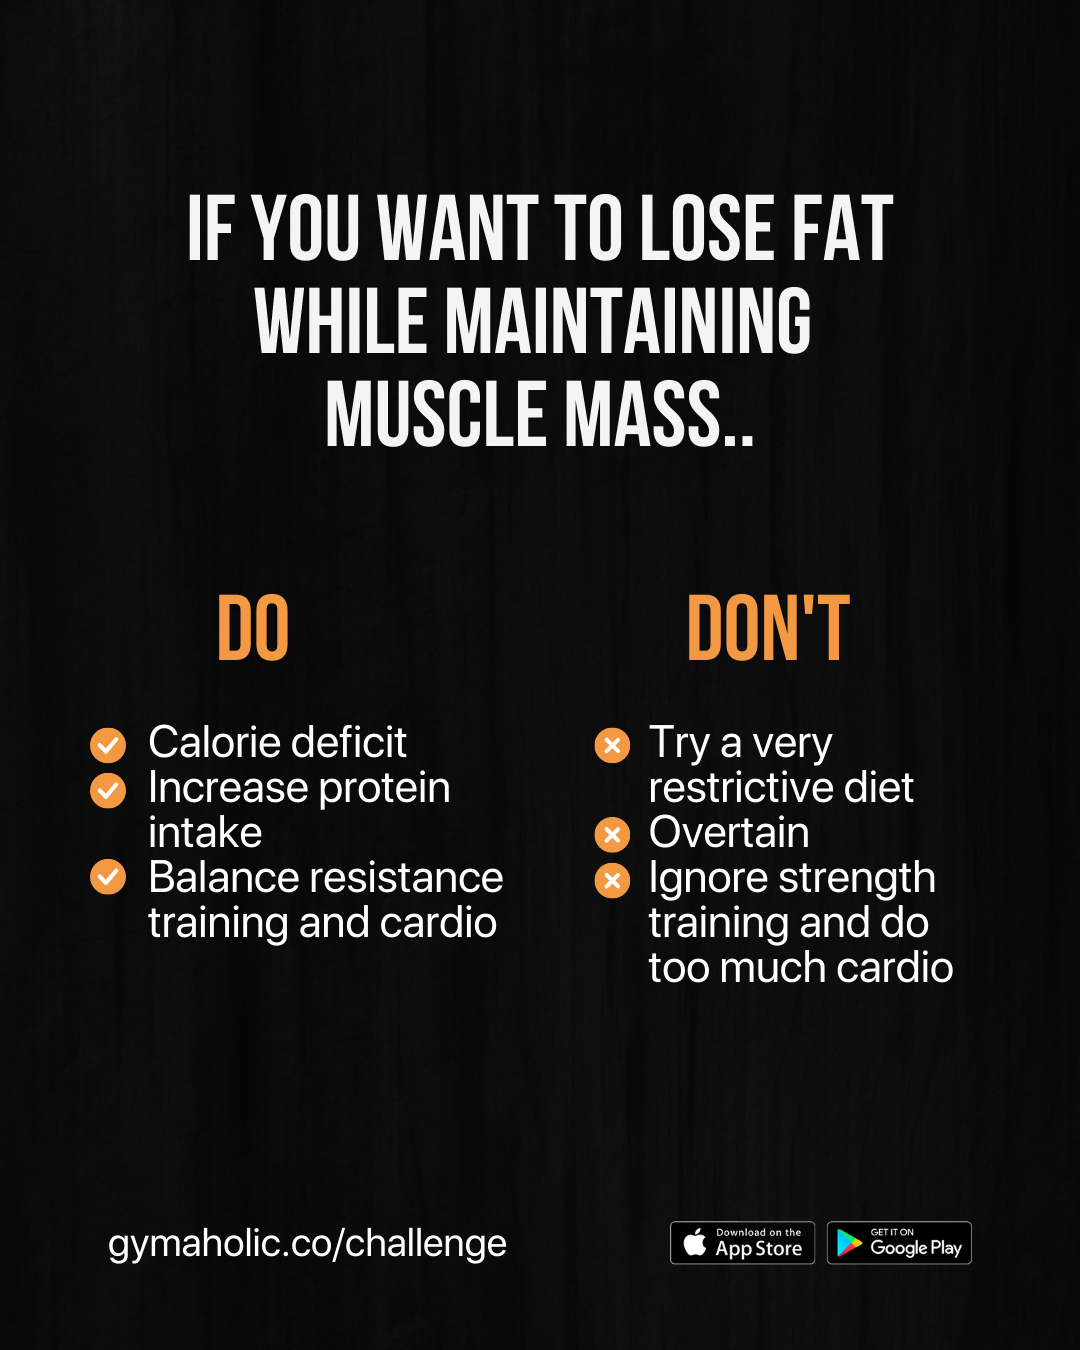 If you want to lose fat while maintaining muscle mass